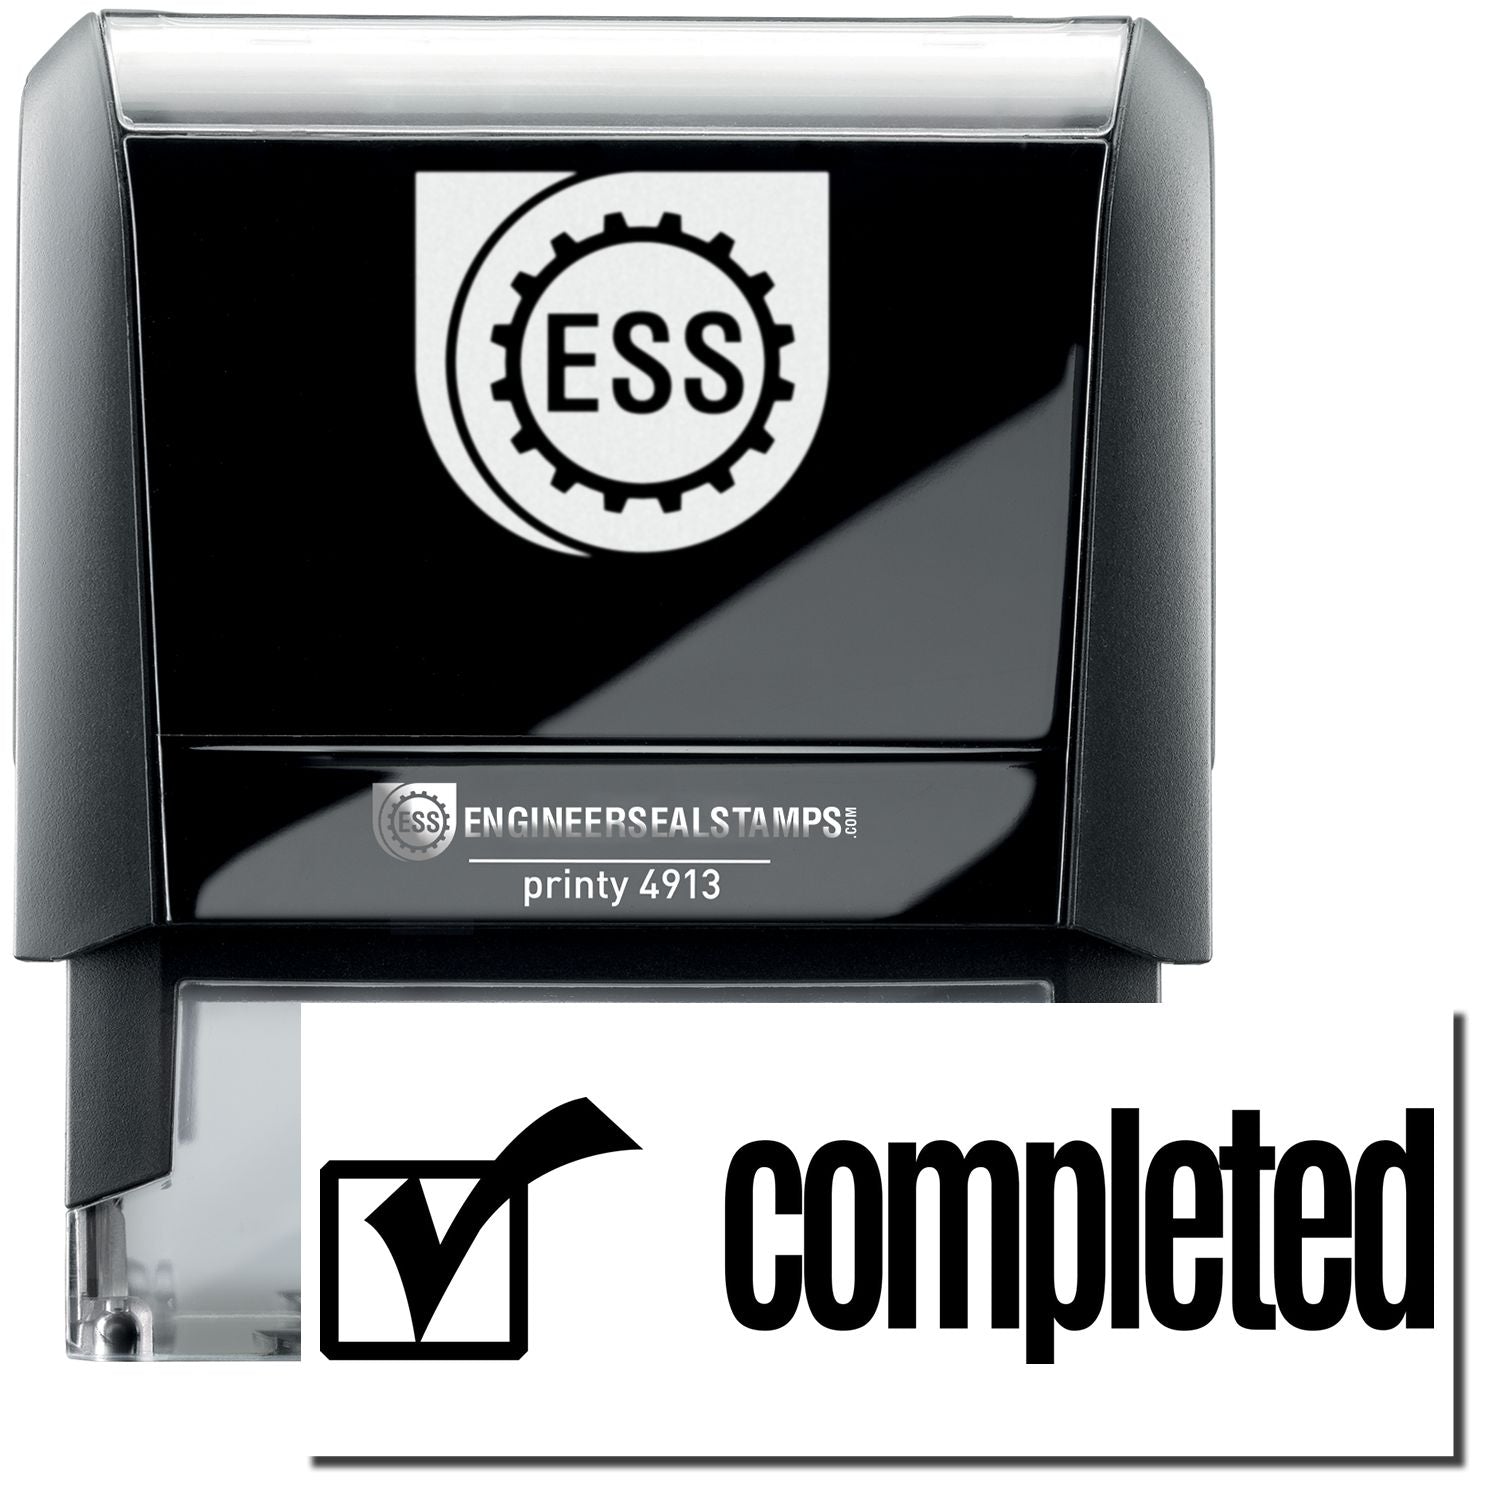 A self-inking stamp with a stamped image showing how the text "completed" in a large font with an image of a checkbox on the left side is displayed after stamping.